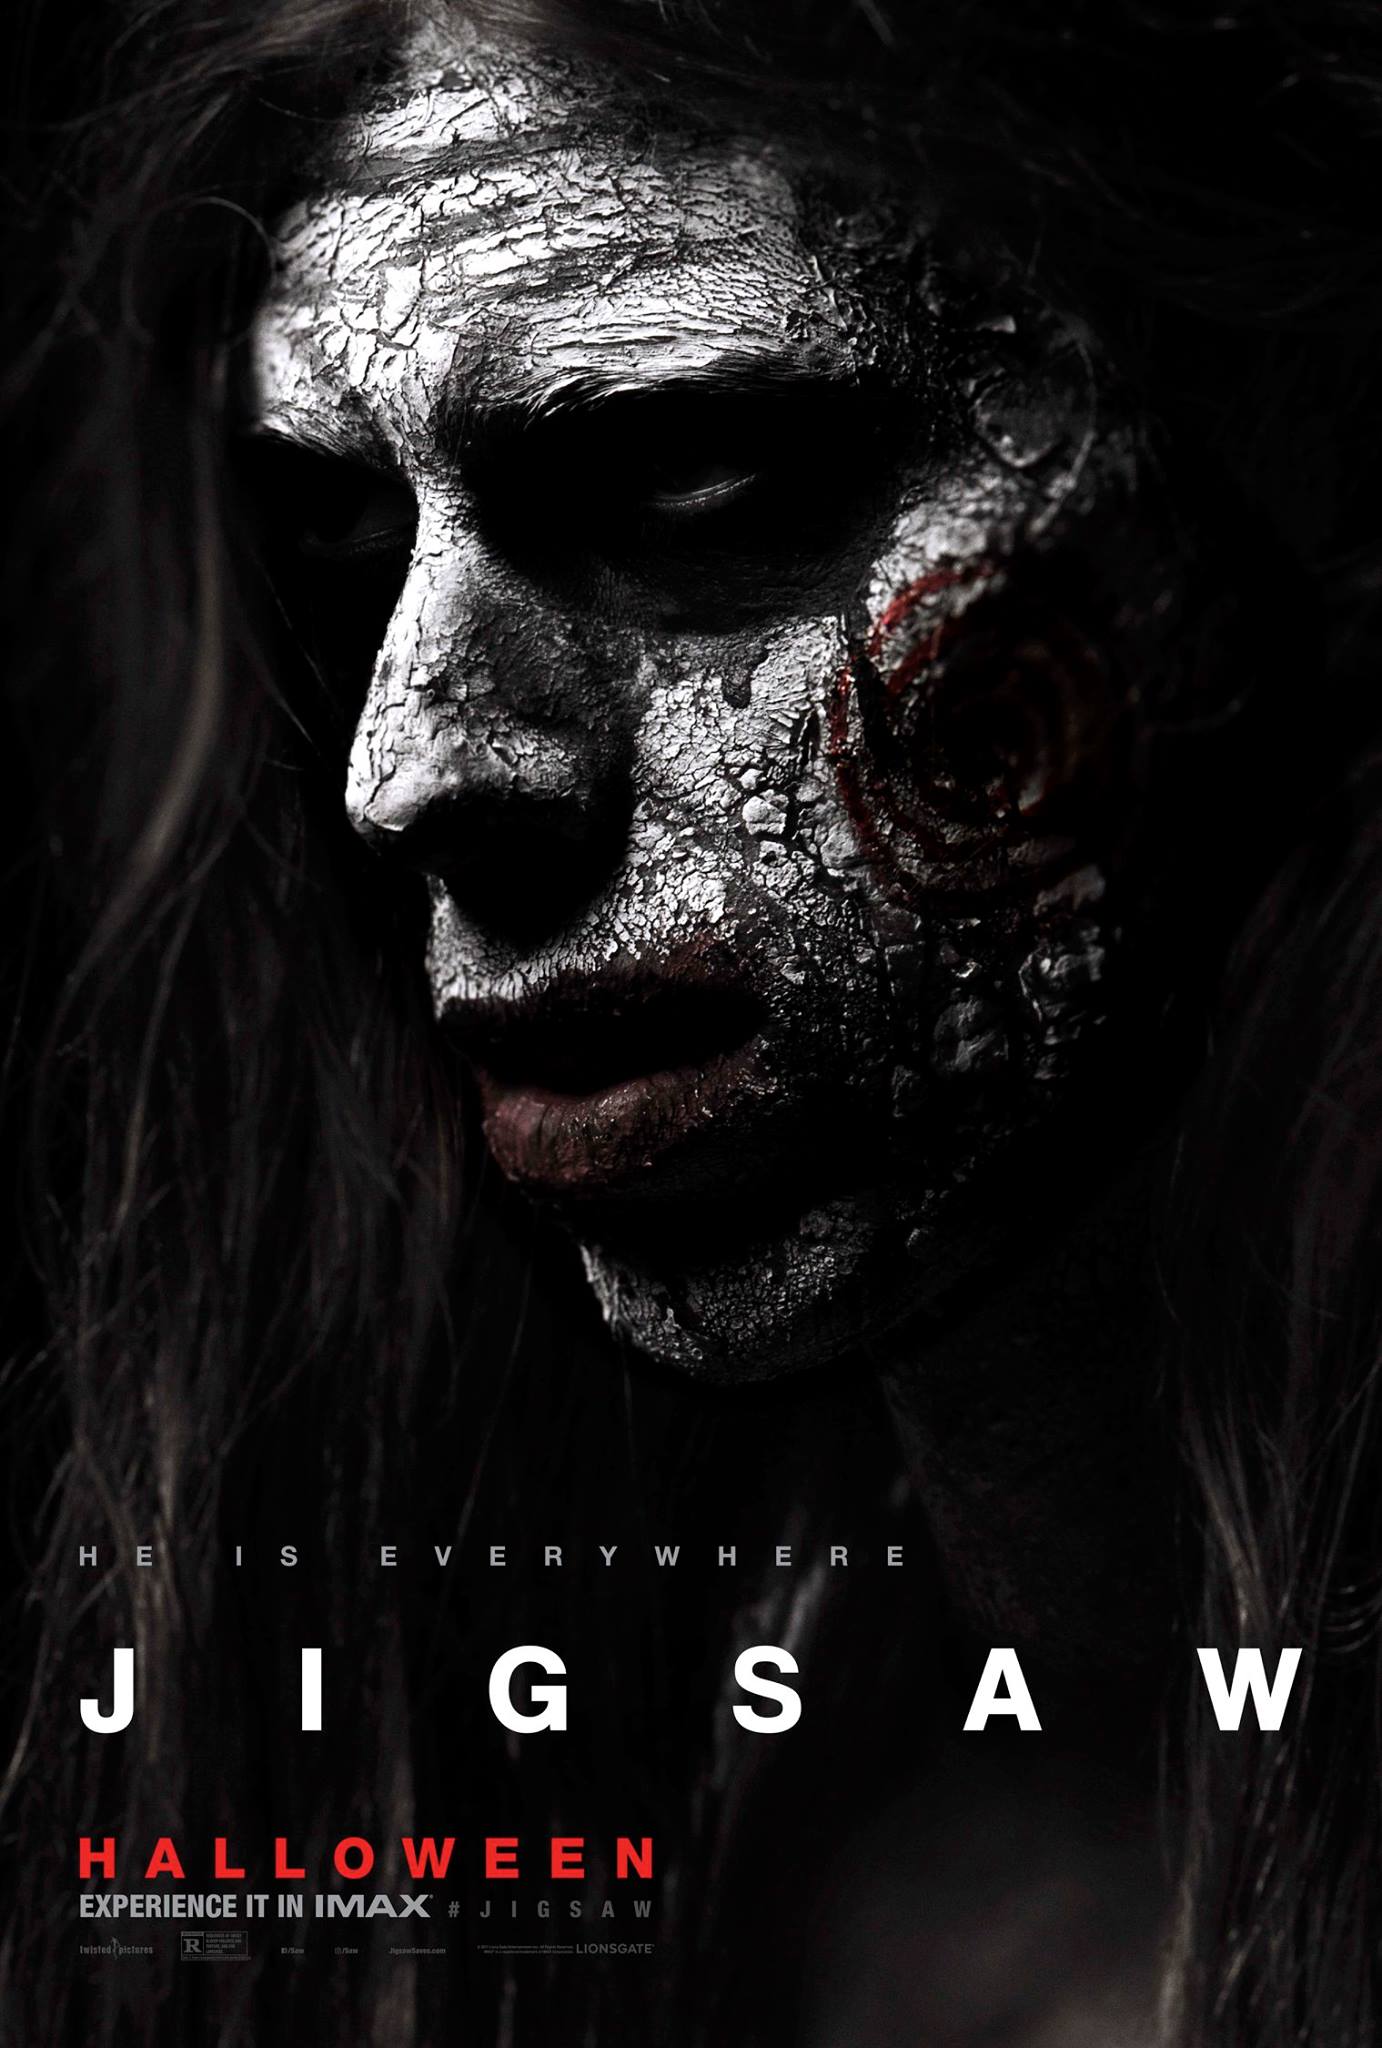 jigsaw character poster 4